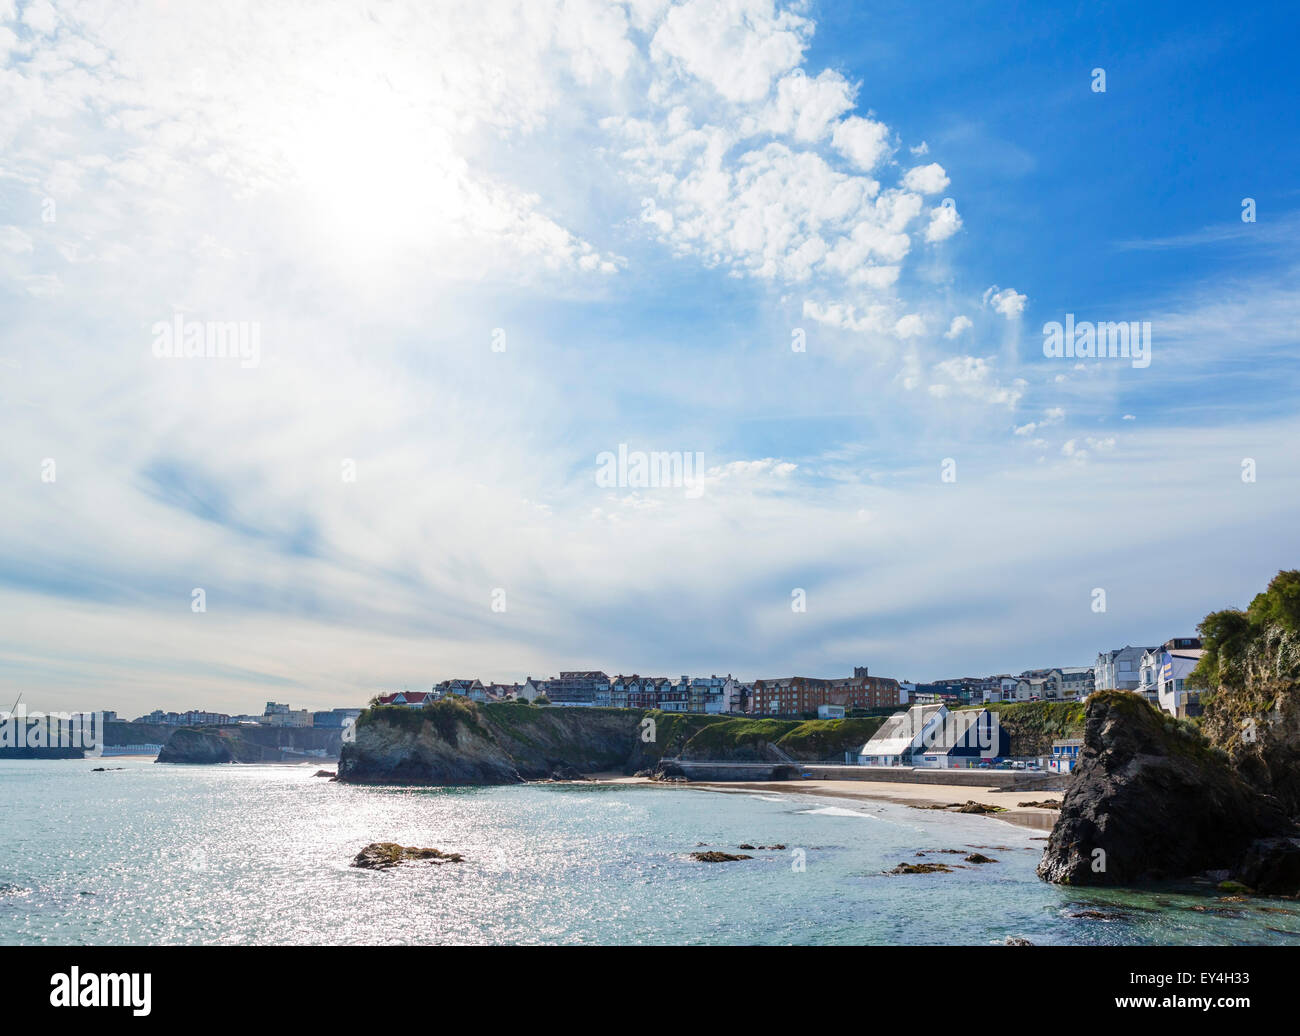 Newquay Bay viewed from the harbour showing the town and beaches, Newquay, Cornwall, England, UK Stock Photo